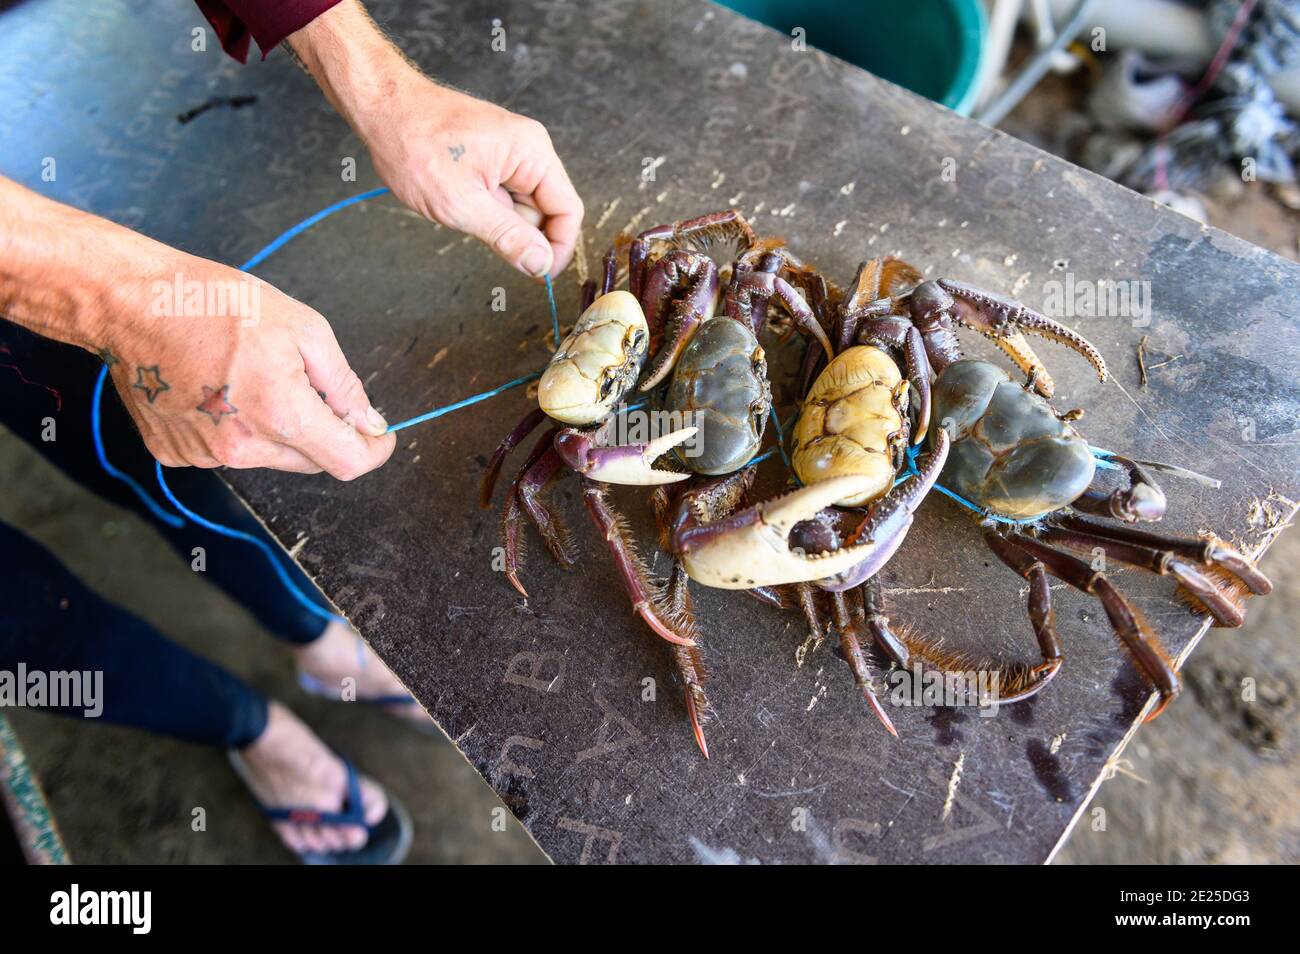 Crab fishing, Kourou, French Guiana. After fishing, the crabs are